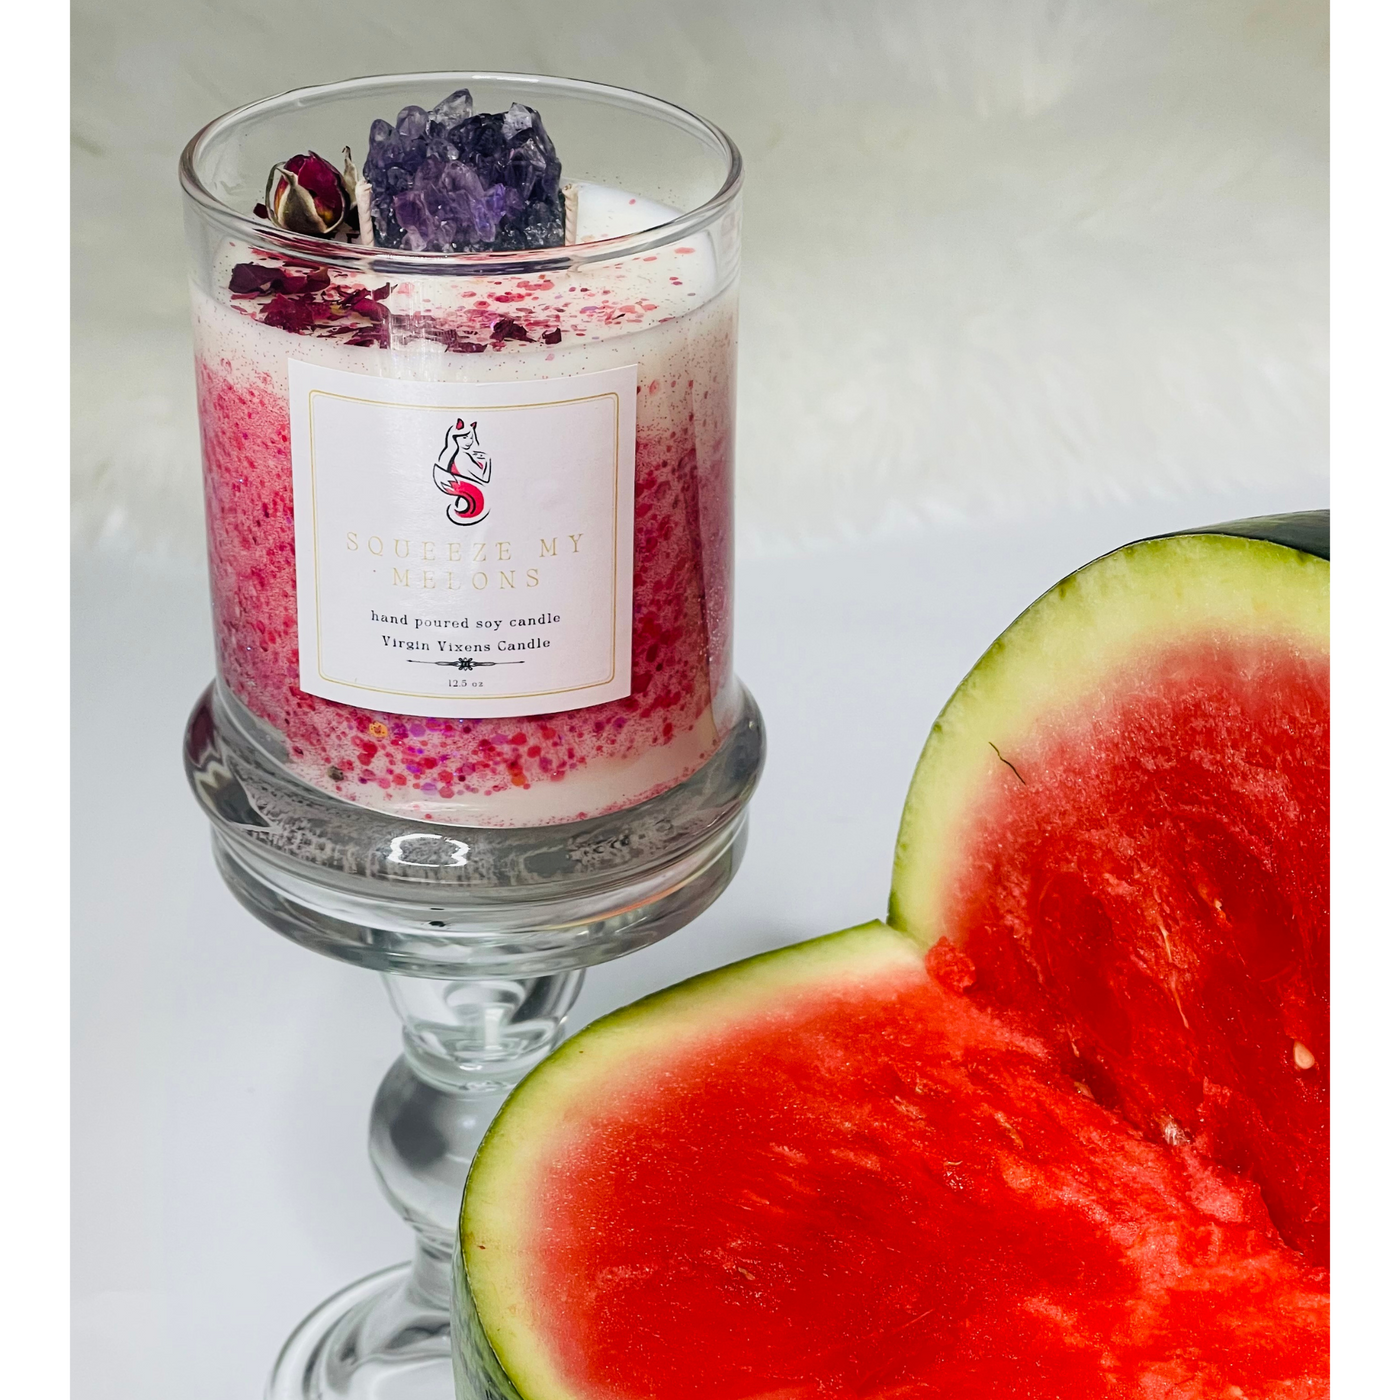 "Squeeze My Melons" Scented Candle - Jolly Rancher Watermelon Fragrance